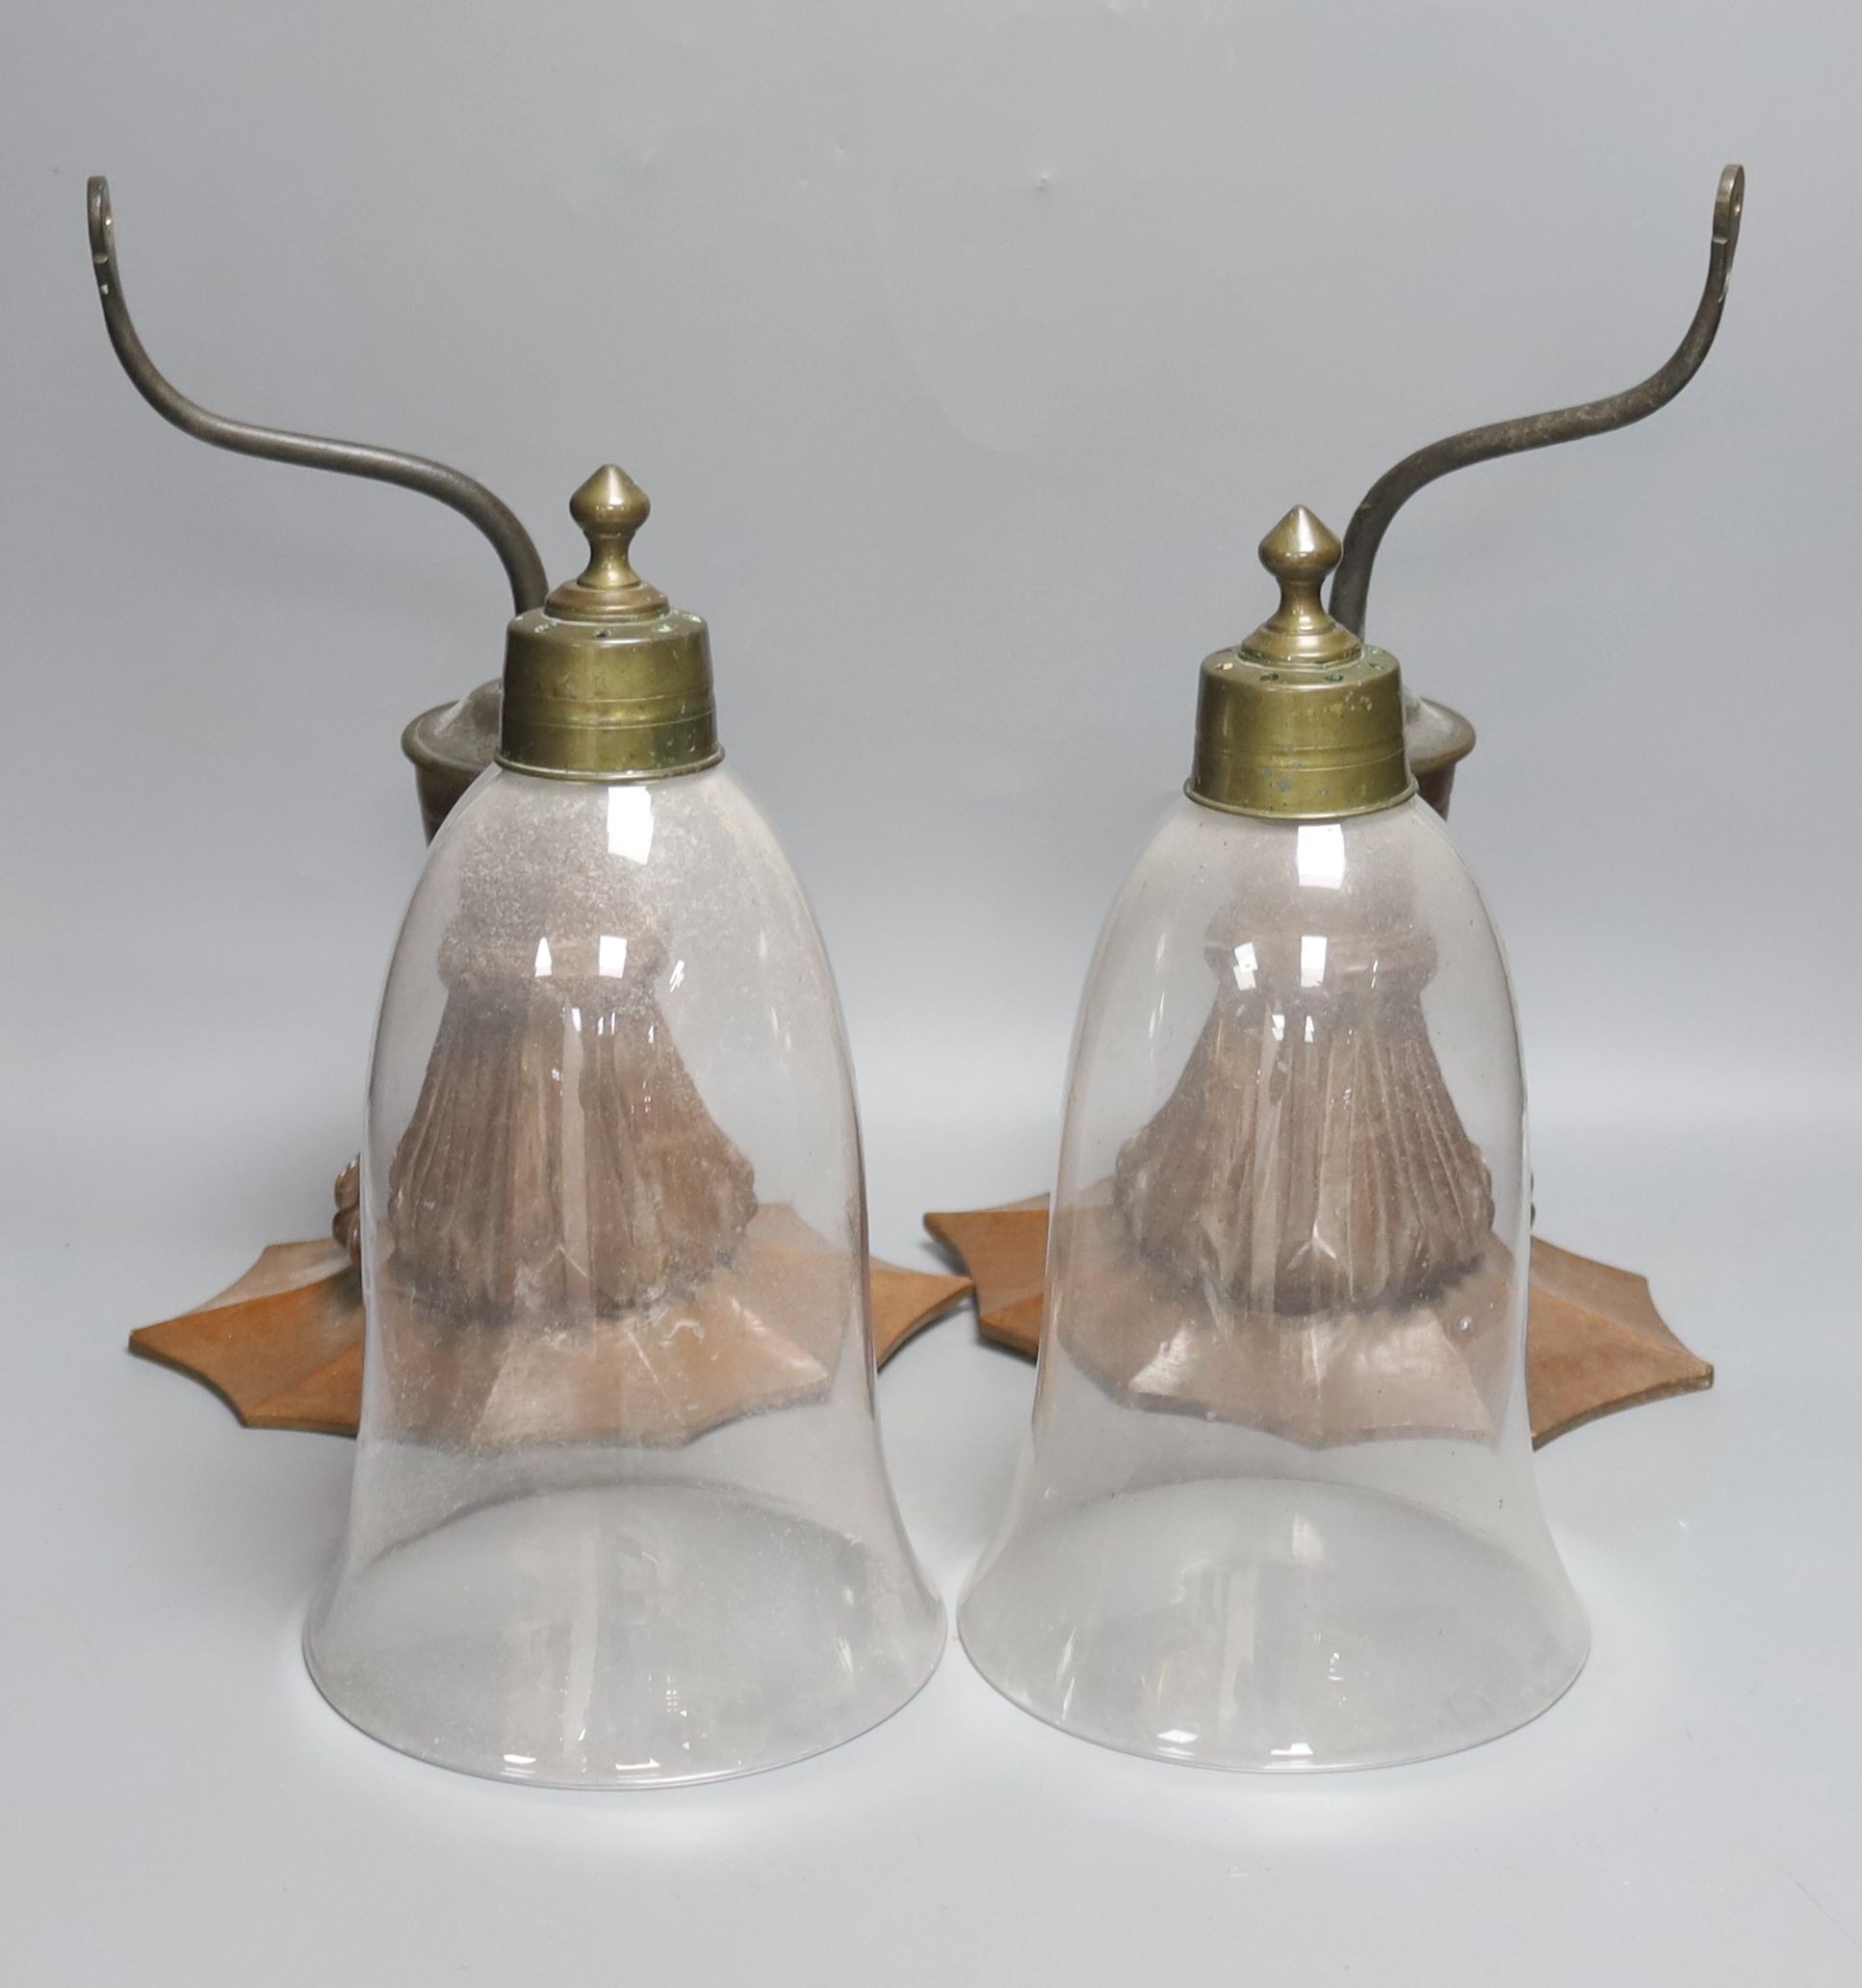 A pair of early 20th century decorative carved oand brass wall lights with glass storm shades